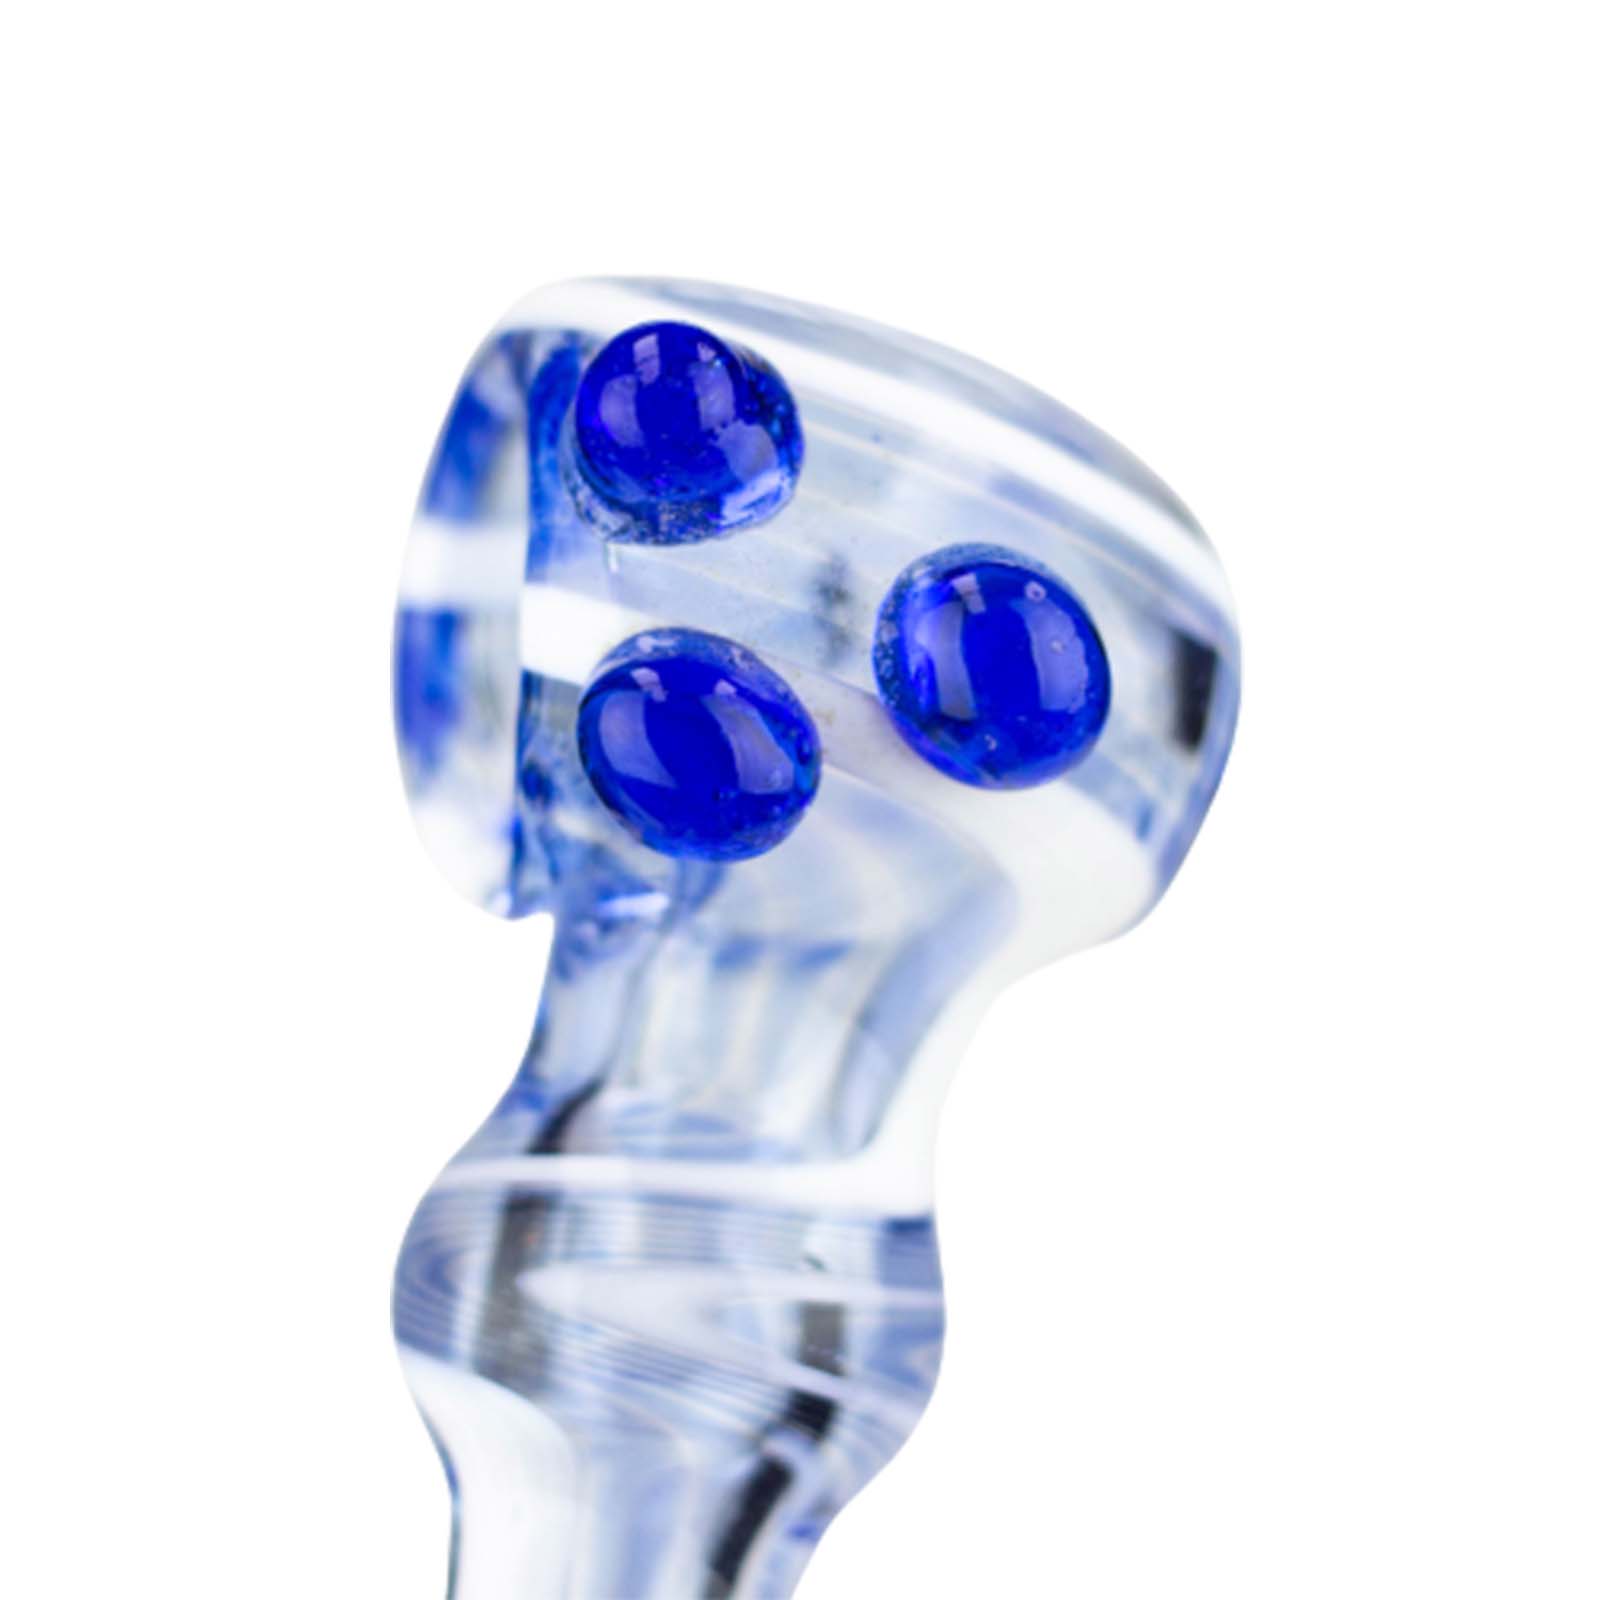 3.5 inch Soft Glass Hand Pipes - Pack of 2